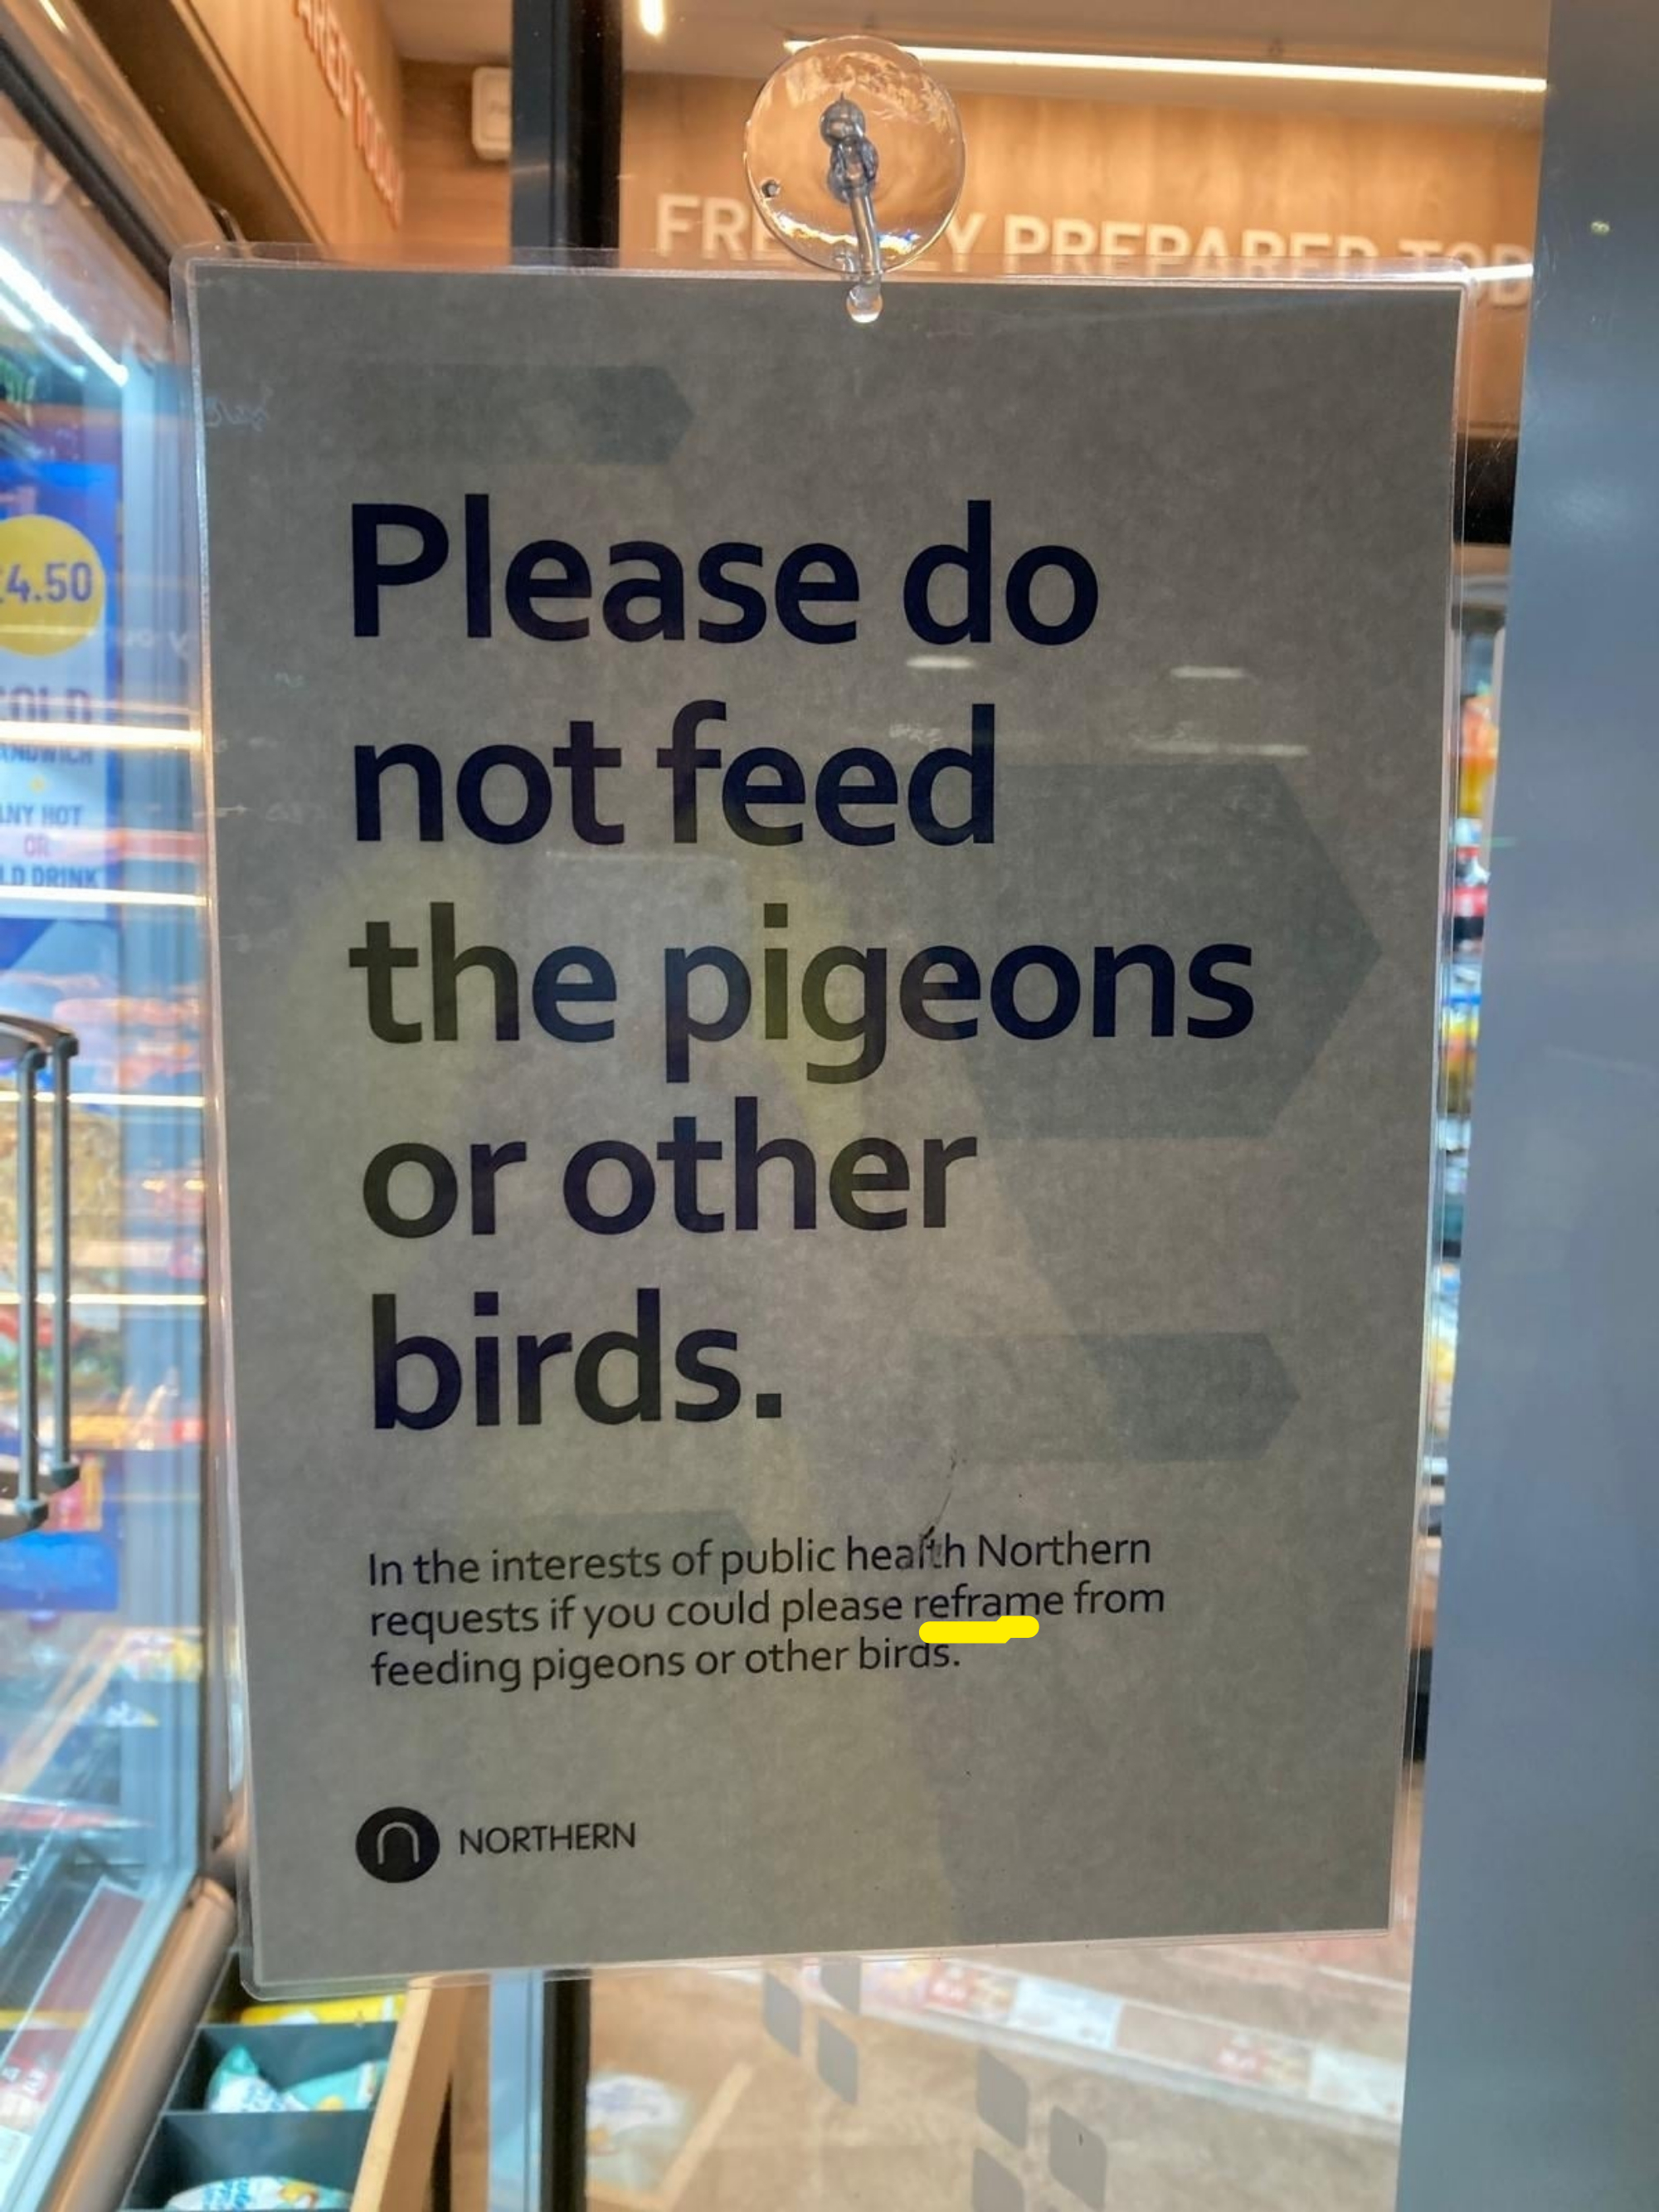 Sign requests not to feed pigeons or birds to prevent encouraging them inside the store